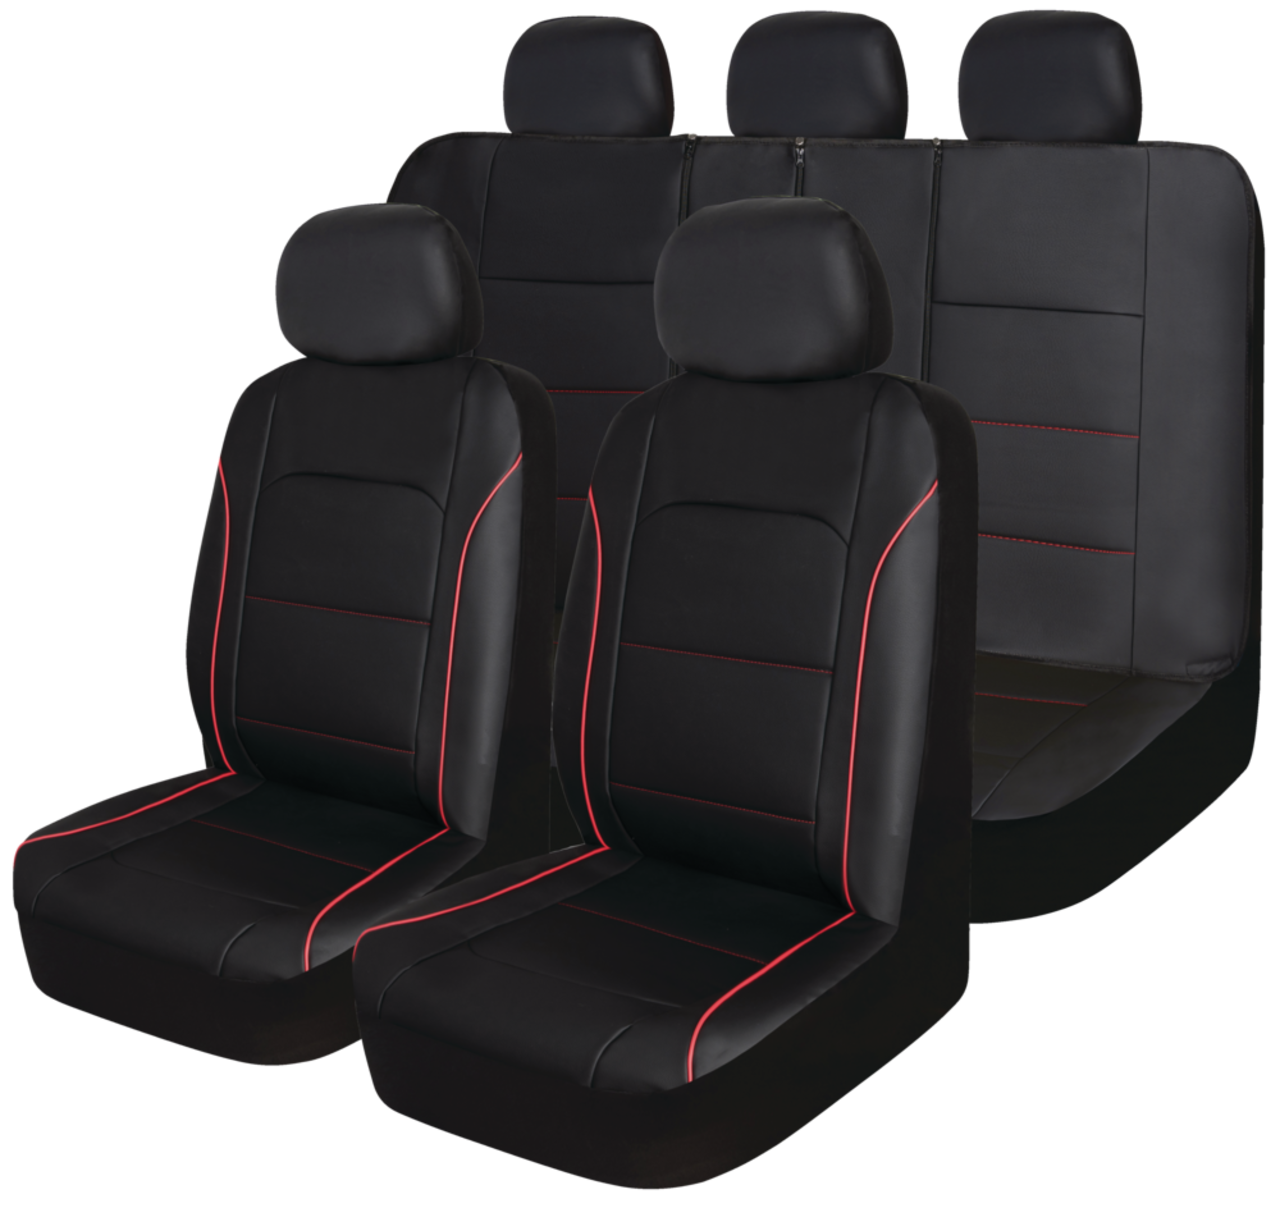 https://media-www.canadiantire.ca/product/automotive/car-care-accessories/auto-comfort/0326768/autotrends-red-piping-sport-seat-cover-kit-582dd8fd-0e71-45ed-92cc-f044e1df93b5.png?imdensity=1&imwidth=640&impolicy=mZoom